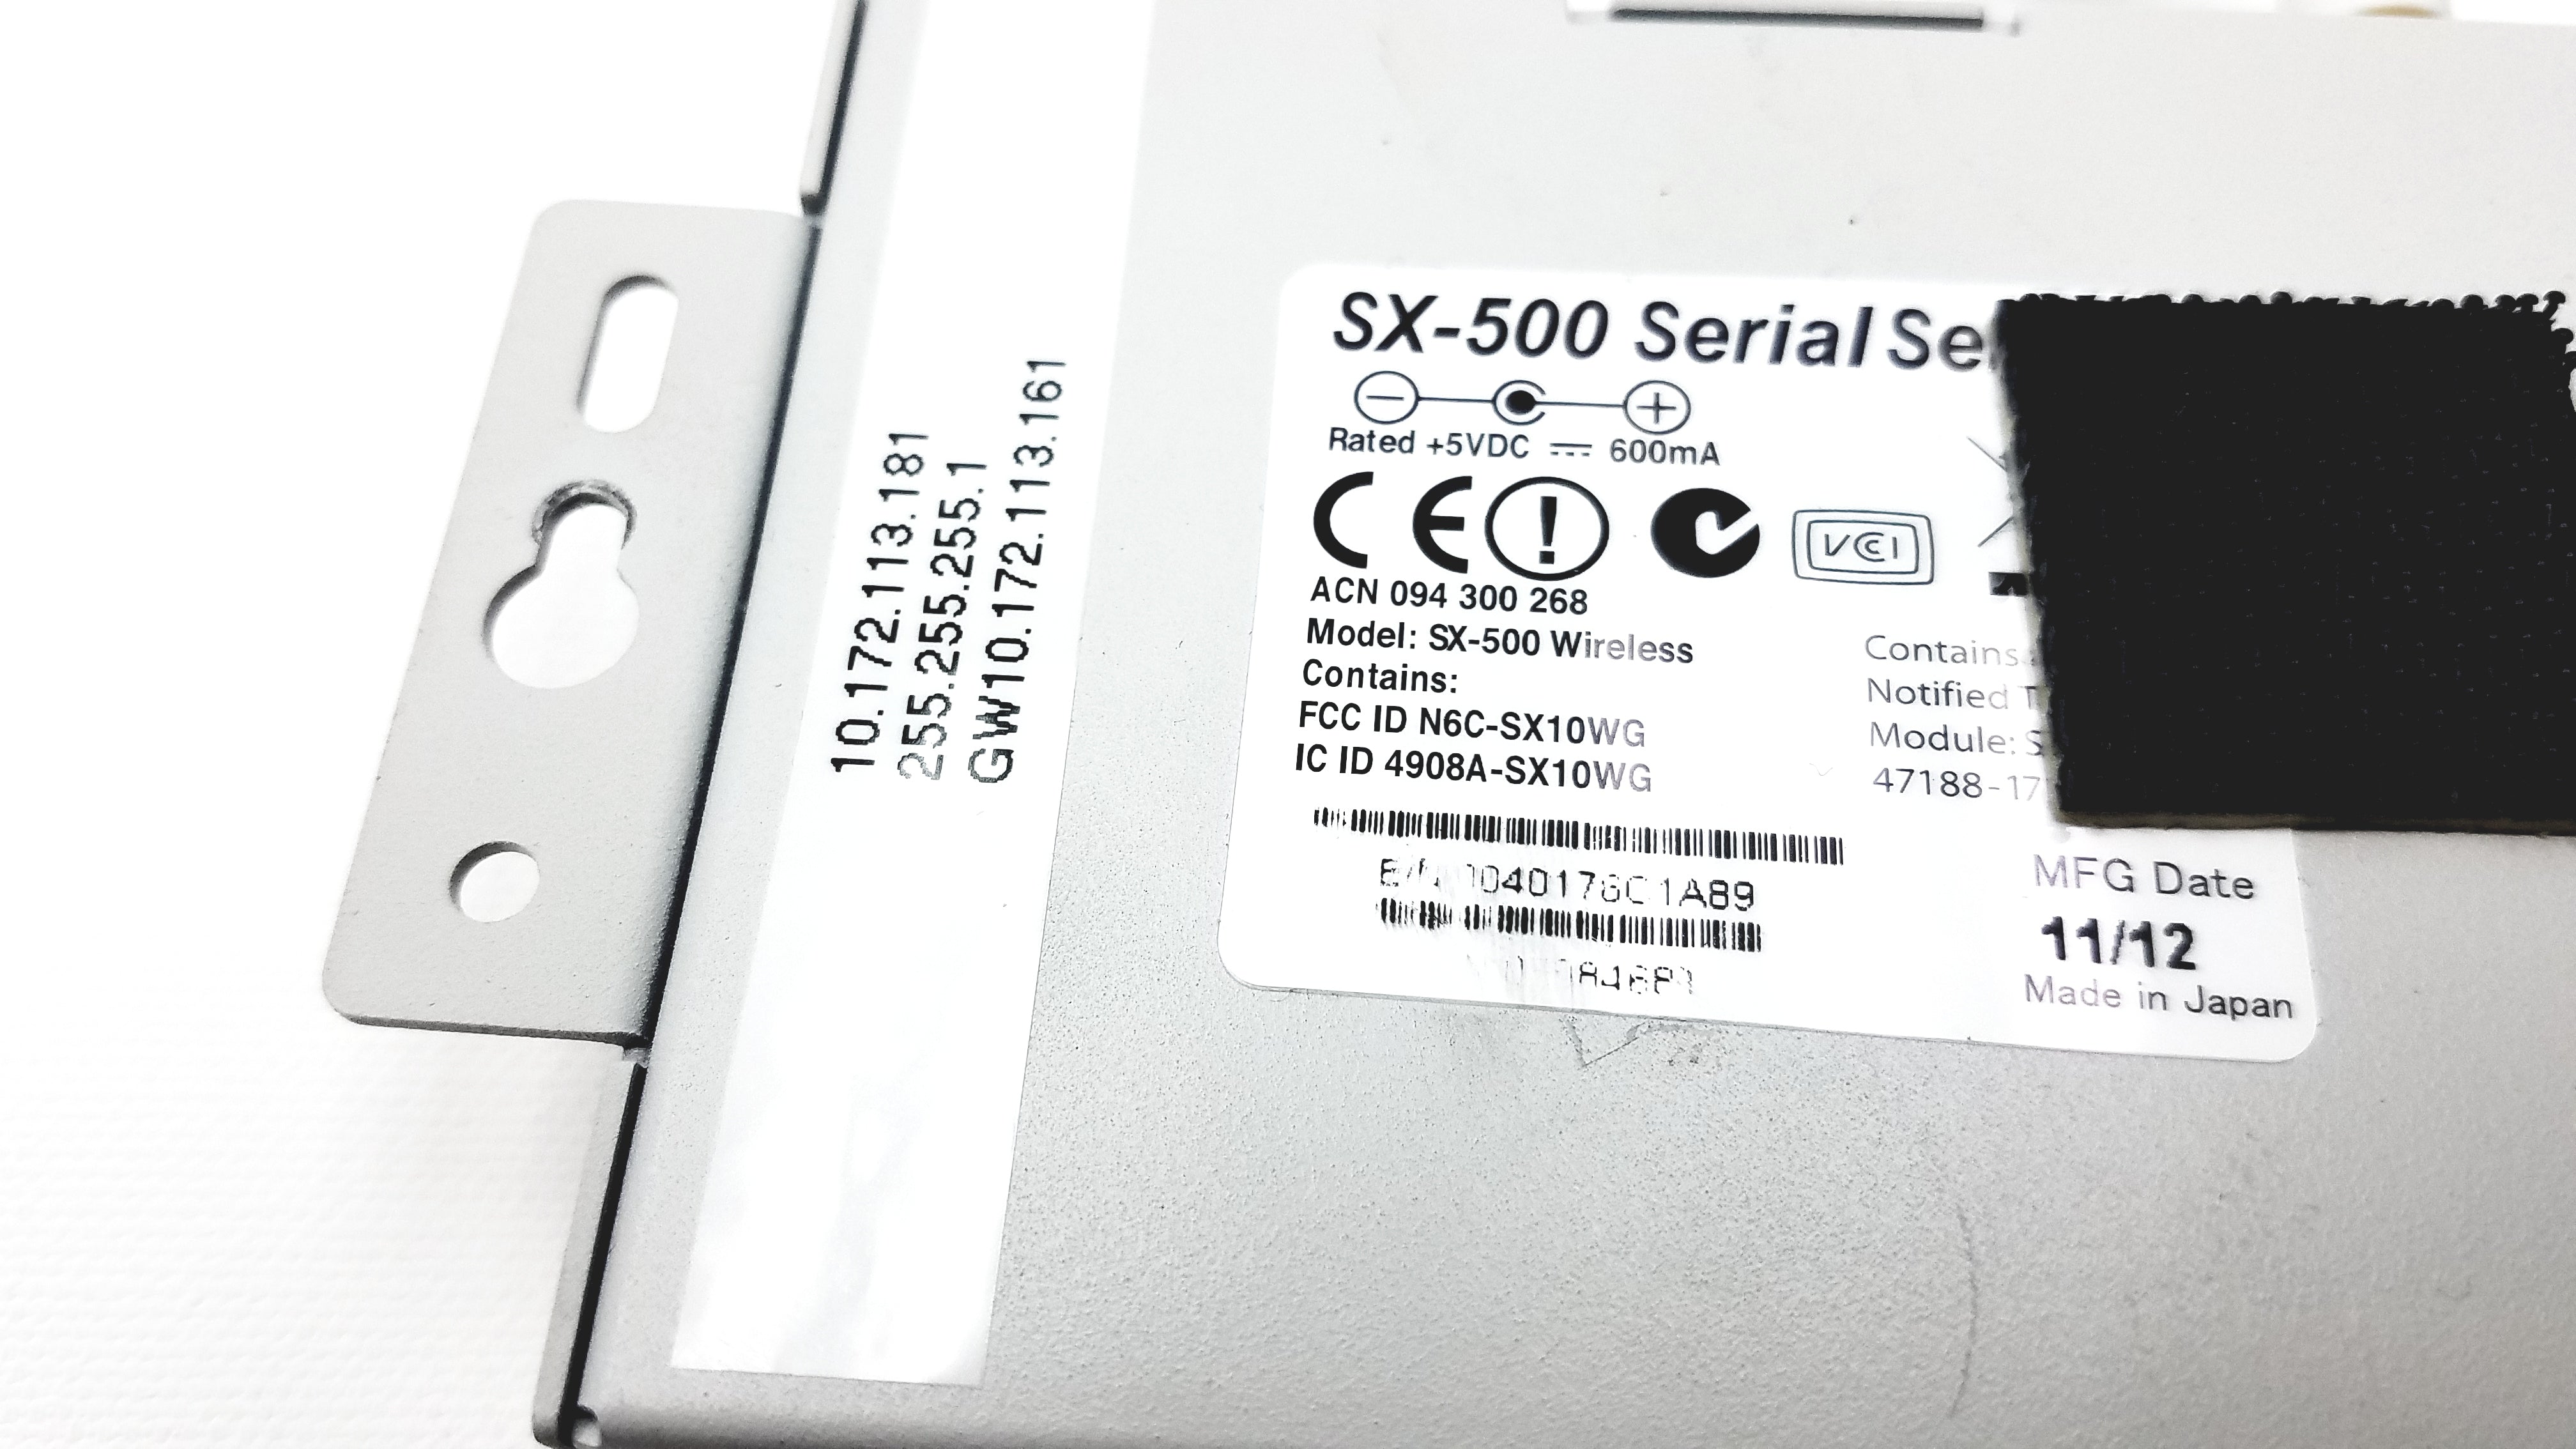 Load image into Gallery viewer, Silex Technology SX-500 Serial Server US LF